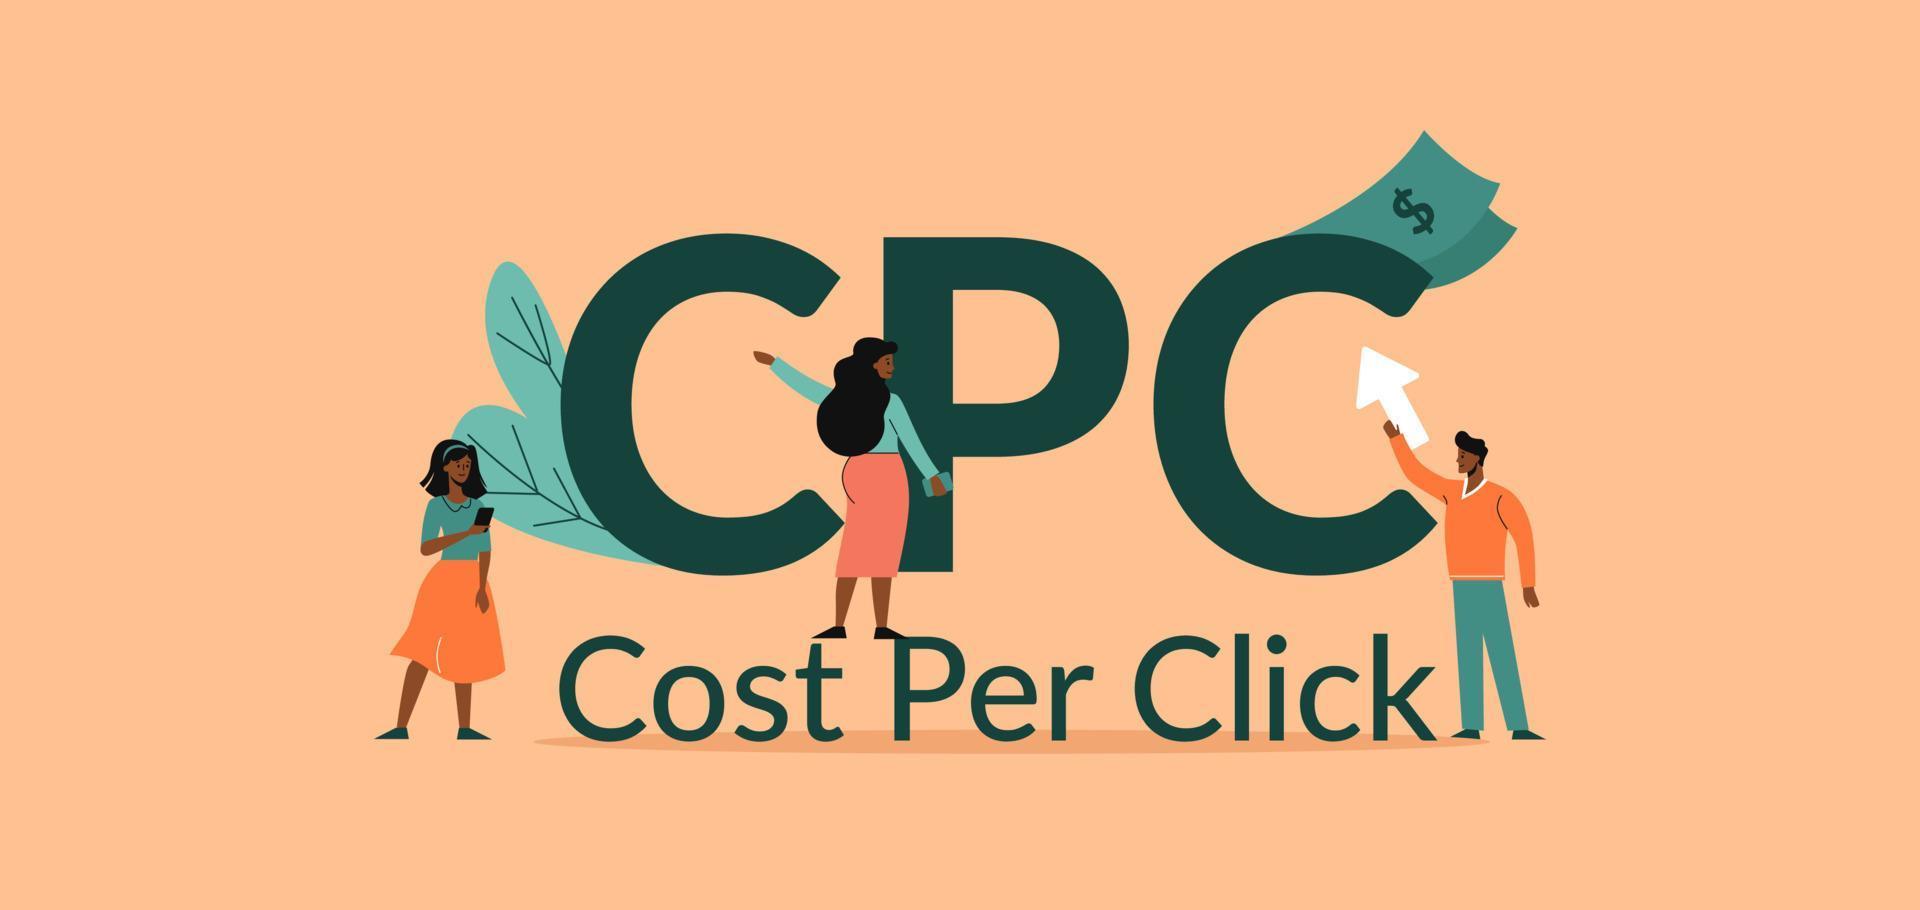 CPC Cost per click illustration. Payment for online marketing advertising financial media engine. vector